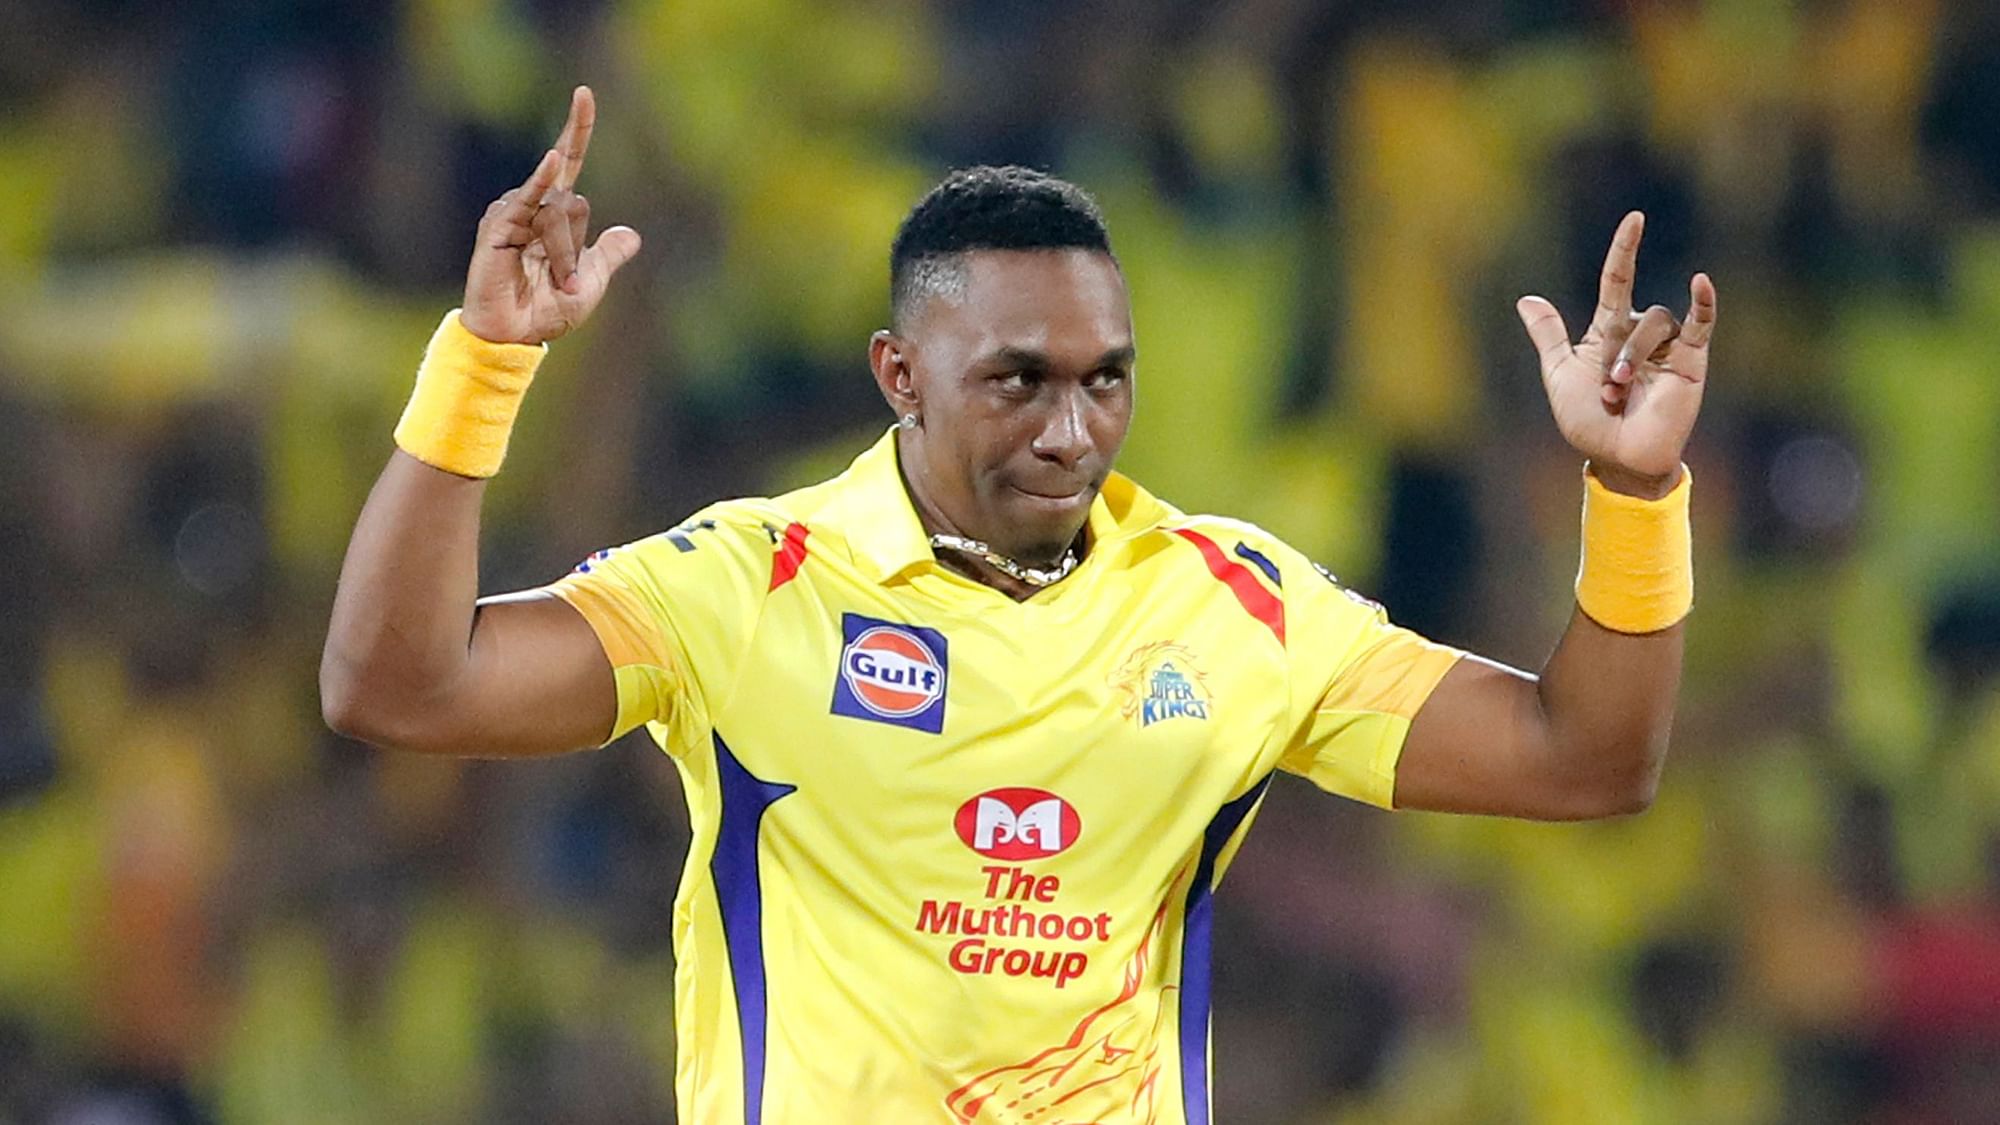 West Indies all-rounder Dwayne Bravo has been ruled out of IPL 2020 due to an injury.